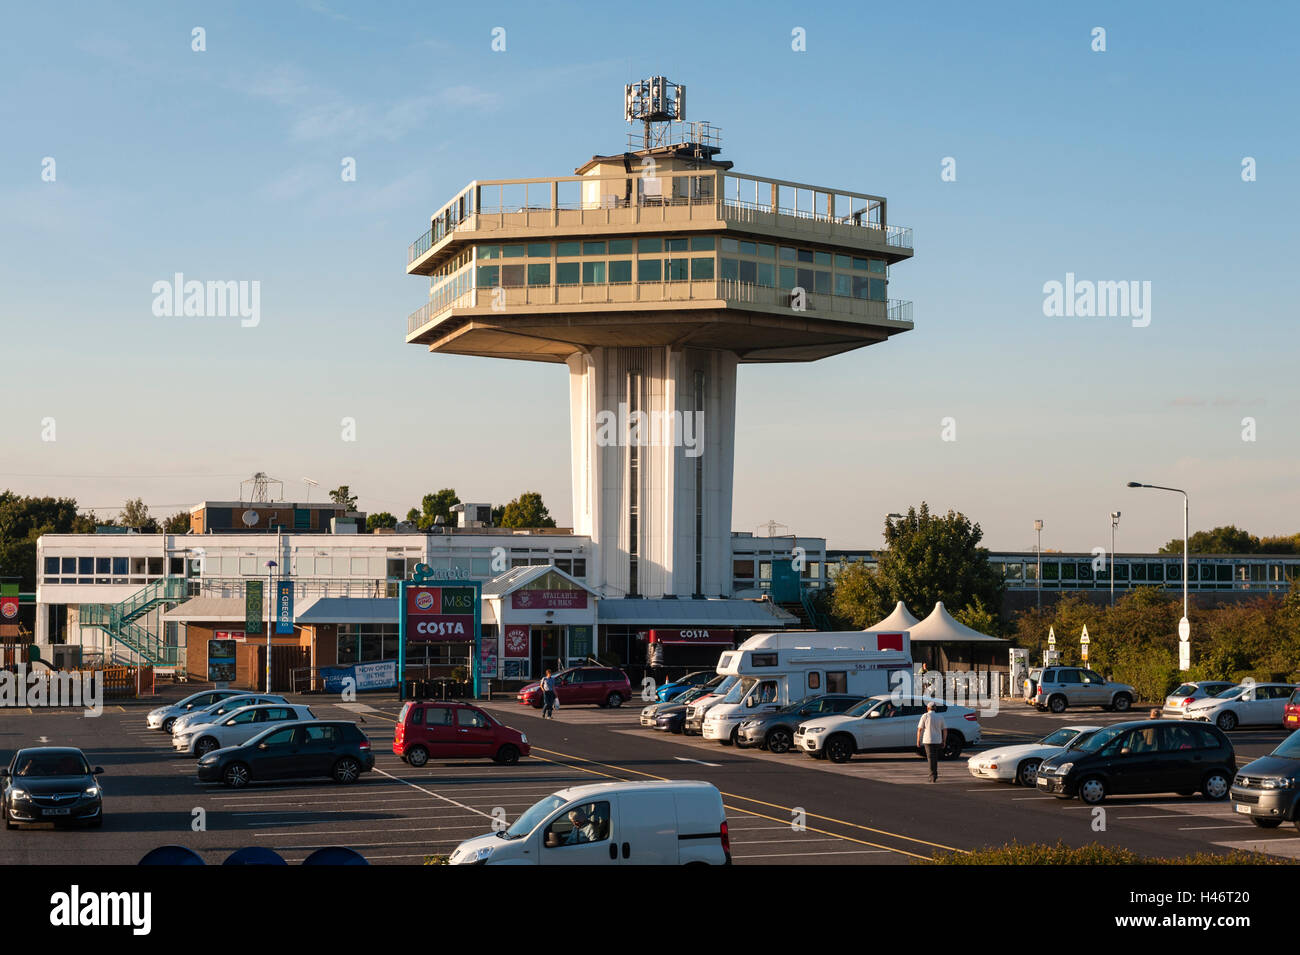 Lancaster (Forton) Services, UK, on the M6 motorway. The Pennine Tower restaurant (now closed) was built in 1965 and is now a listed building Stock Photo